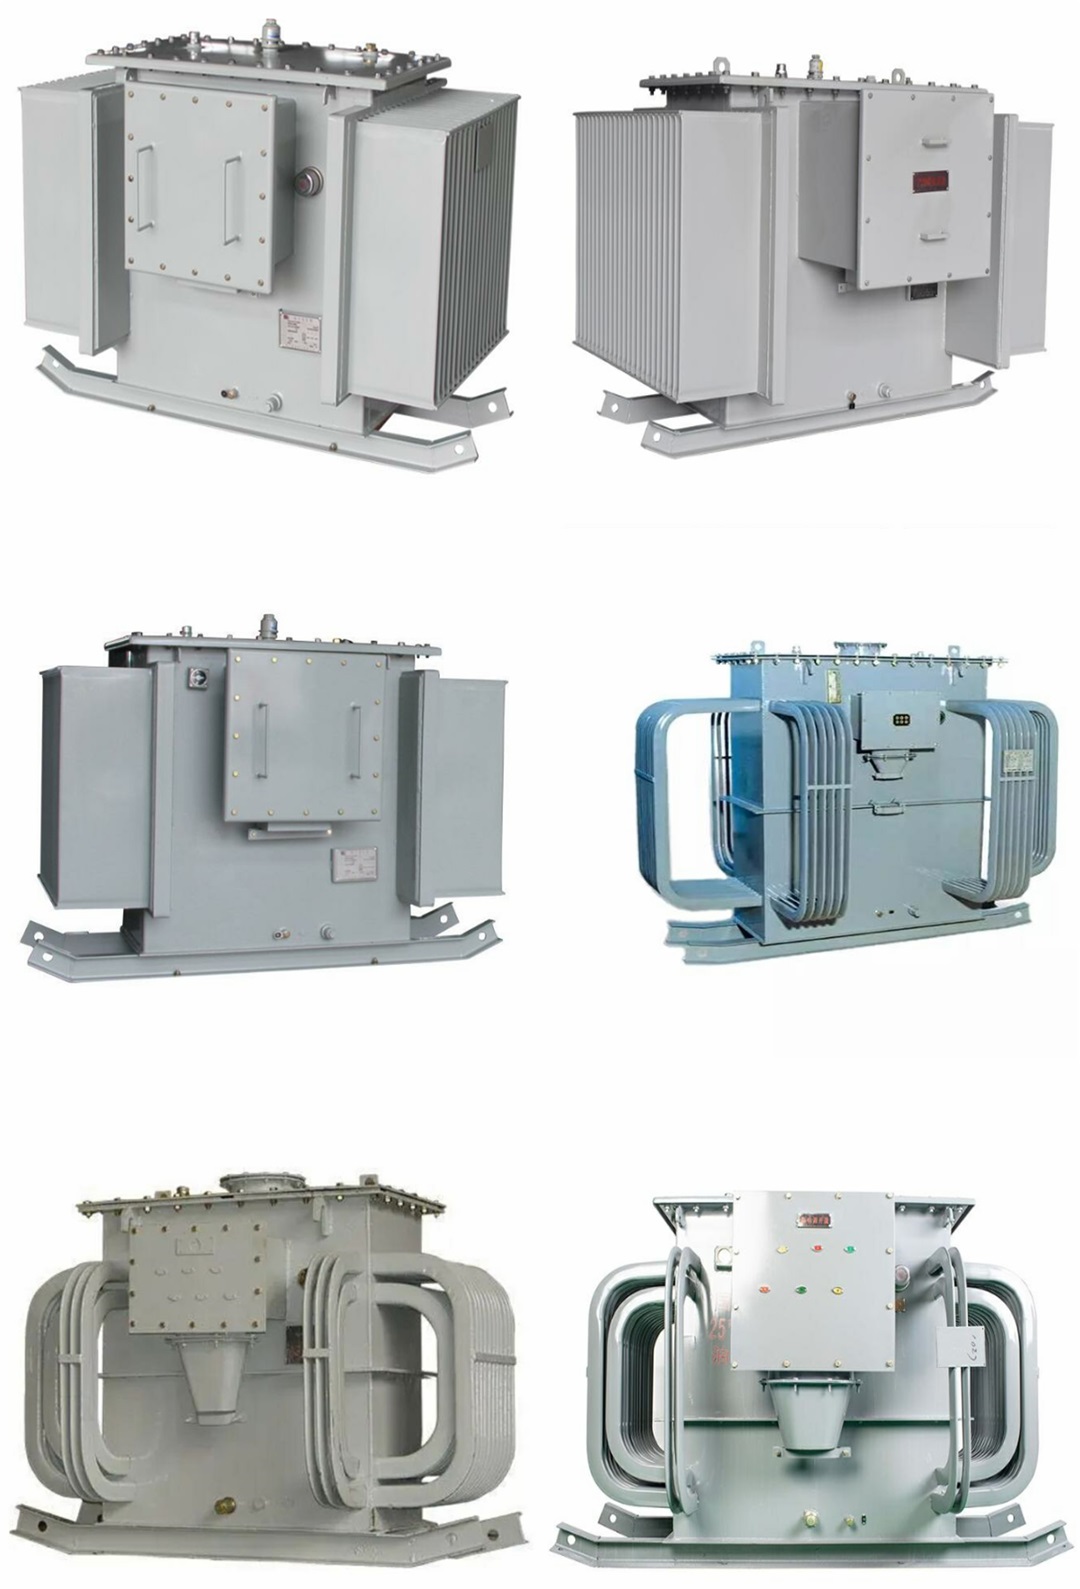 Three phase oil immersed mining power transformer